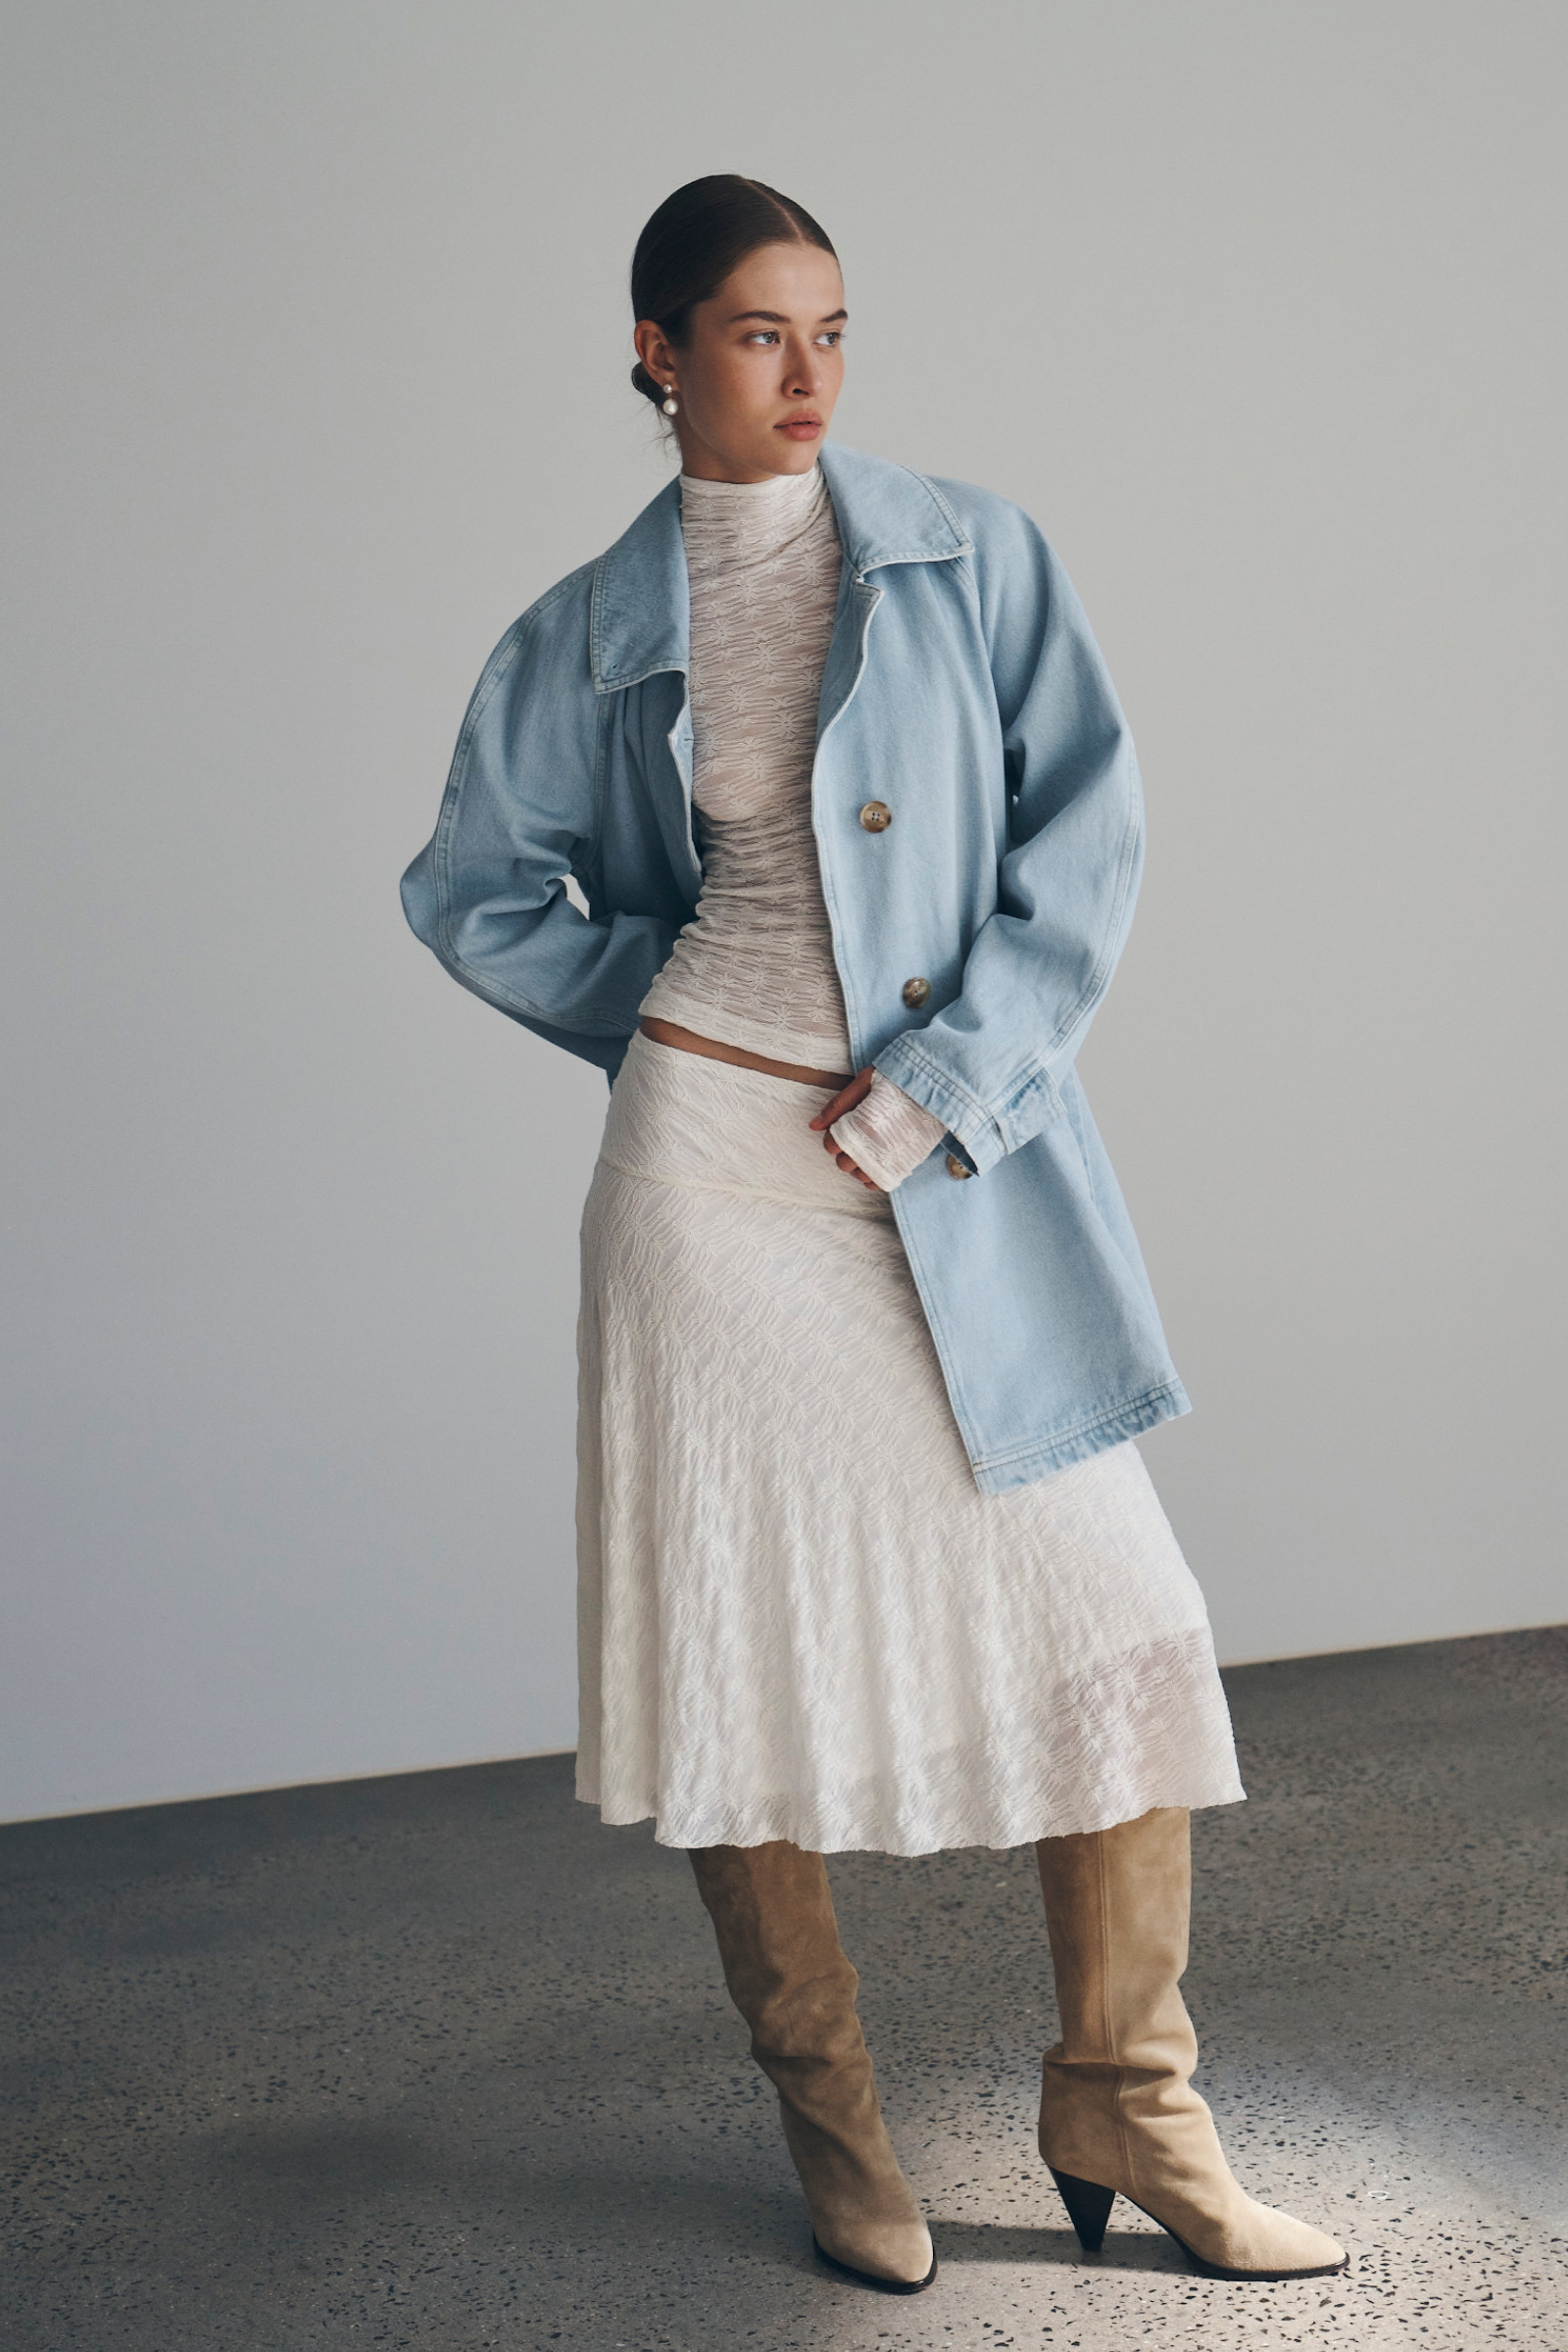 Bianca wears the Valentina Trench Jacket in Washed Denim over the Galo Flower Lace Top and Lydia Flow Lace Midi Skirt, both in Creme. She accessorises with pearl drop earrings and brown suede knee-high boots. Bianca completes the look with a low, slick bun. 